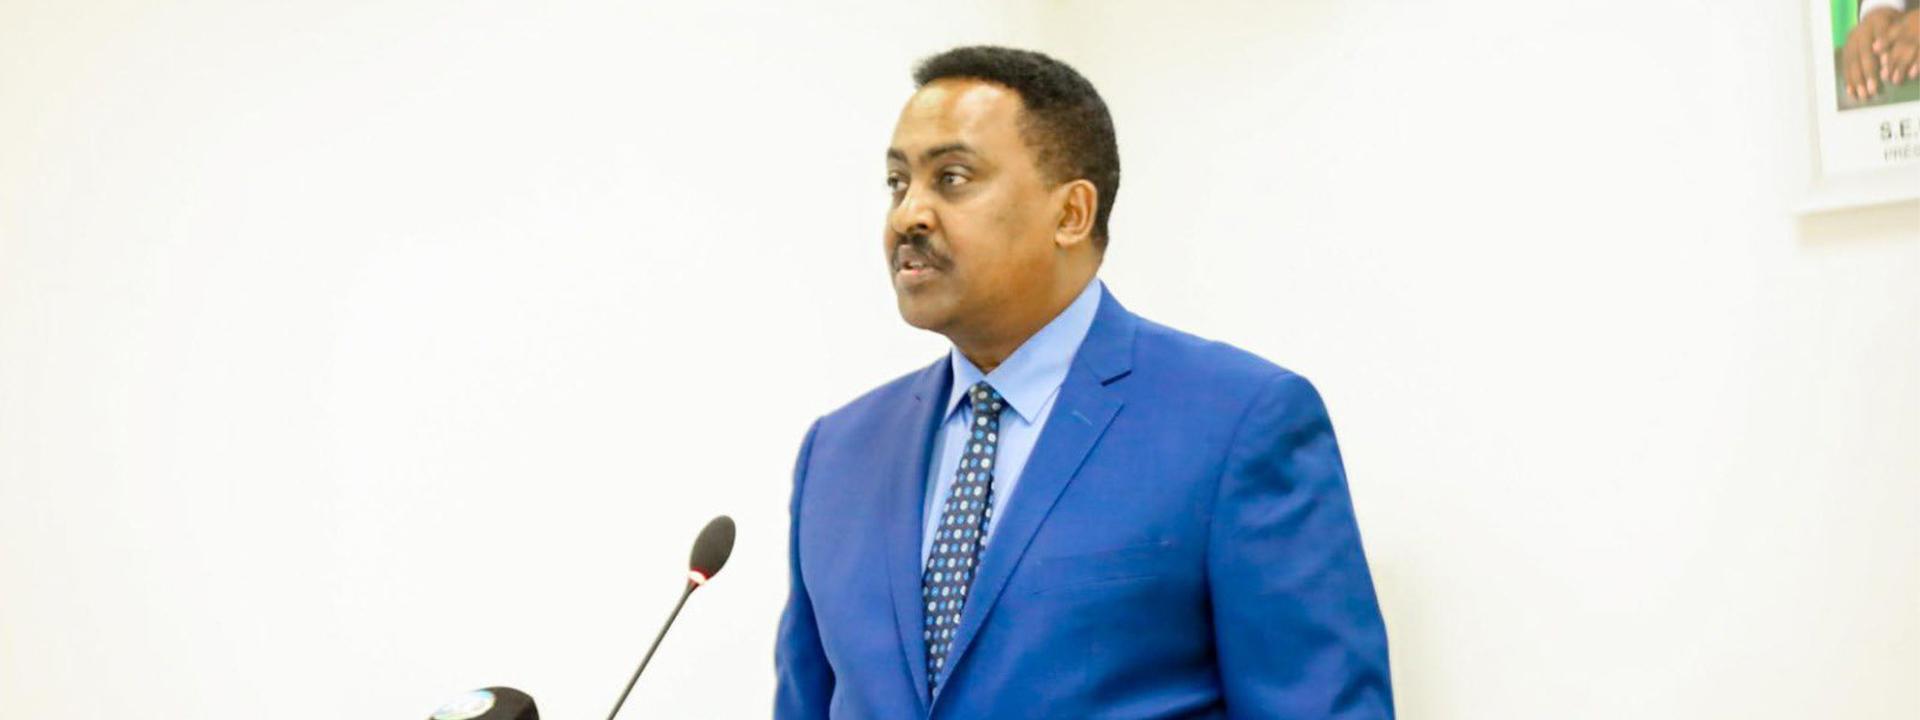 Opening Remarks Workneh Gebeyehu, IGAD Executive Secretary Contracts Signing Ceremony for the Supervision and Construction of the New IGAD HQ Building, Republic Of Djibouti Sunday, 2nd April 2023